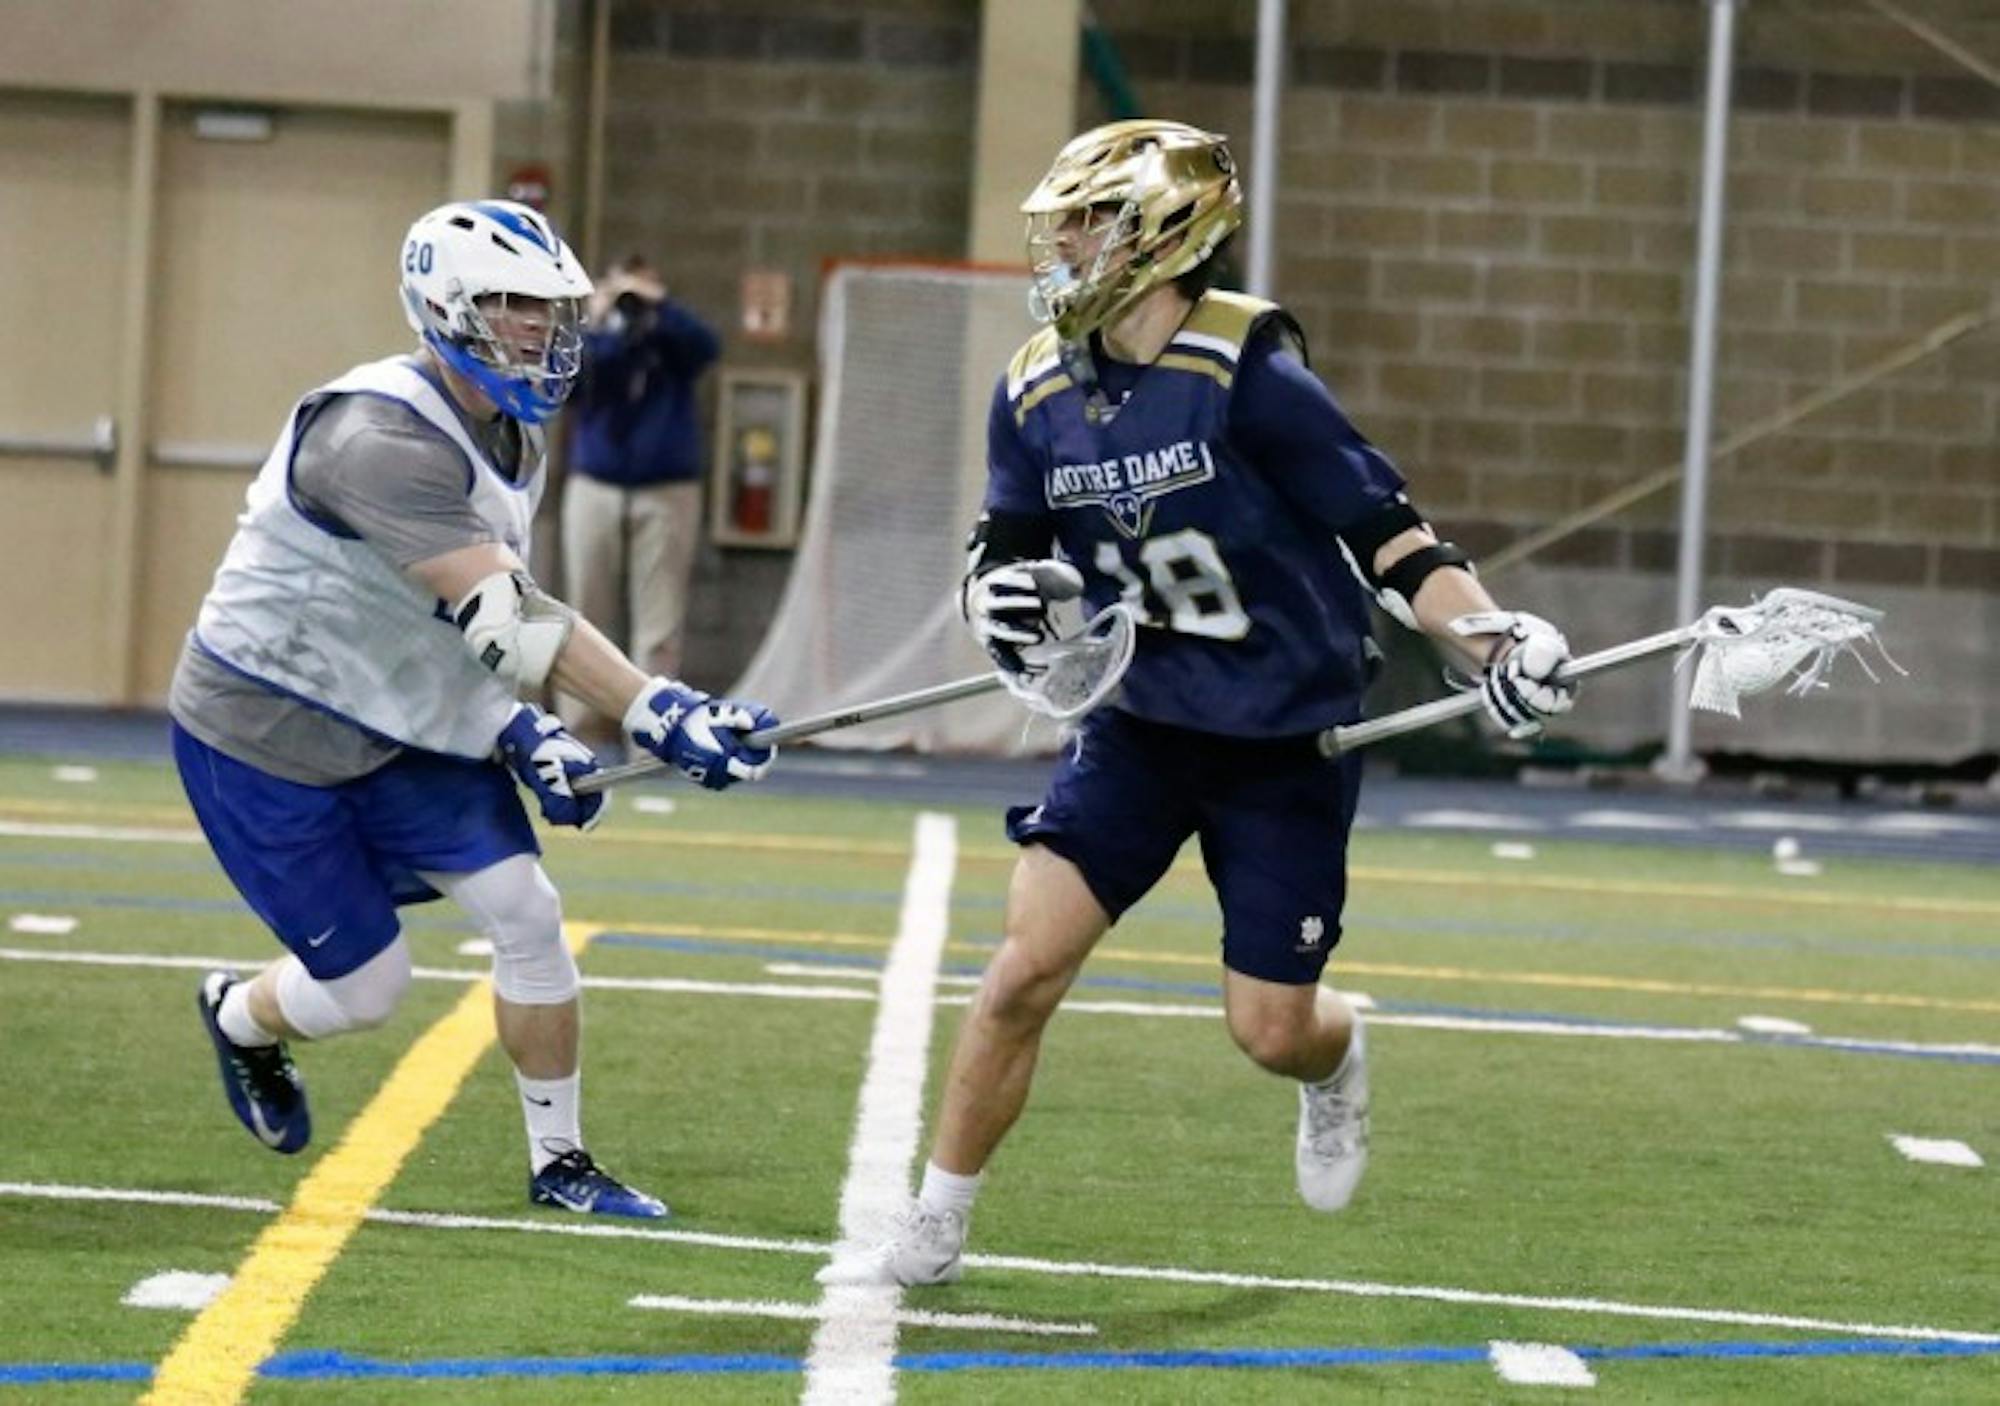 Irish senior attack Eddy Lubowicki looks for a teammate during an exhibition match against Air Force on Jan. 30 at Loftus Sports Center.